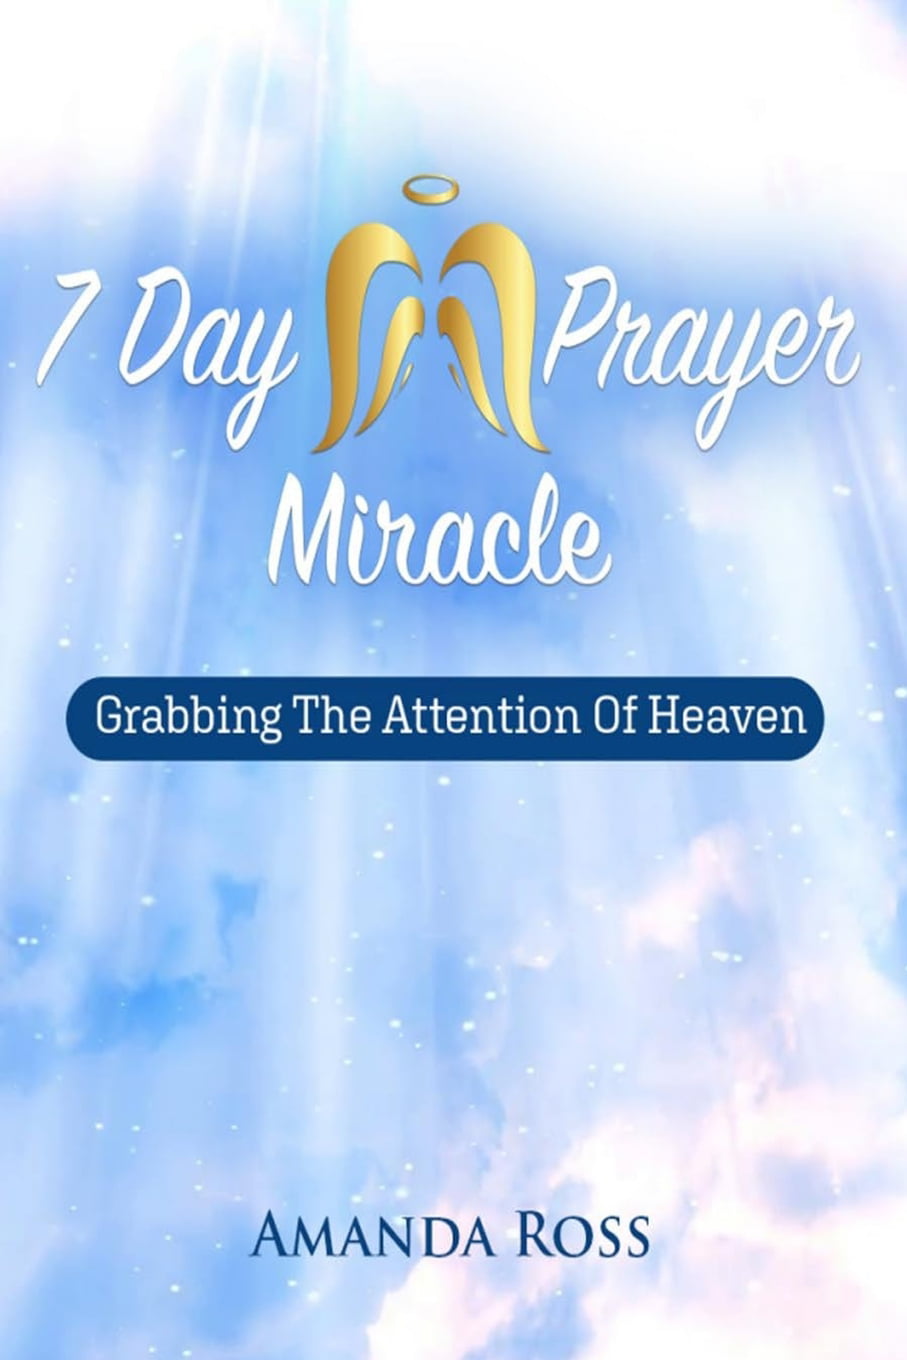 7 Day Prayer Miracle reviews, 7 Day Prayer Miracle PDF BOOK DOWNLOAD, It's SCAM OR LEGIT? by Julia Blog Medium